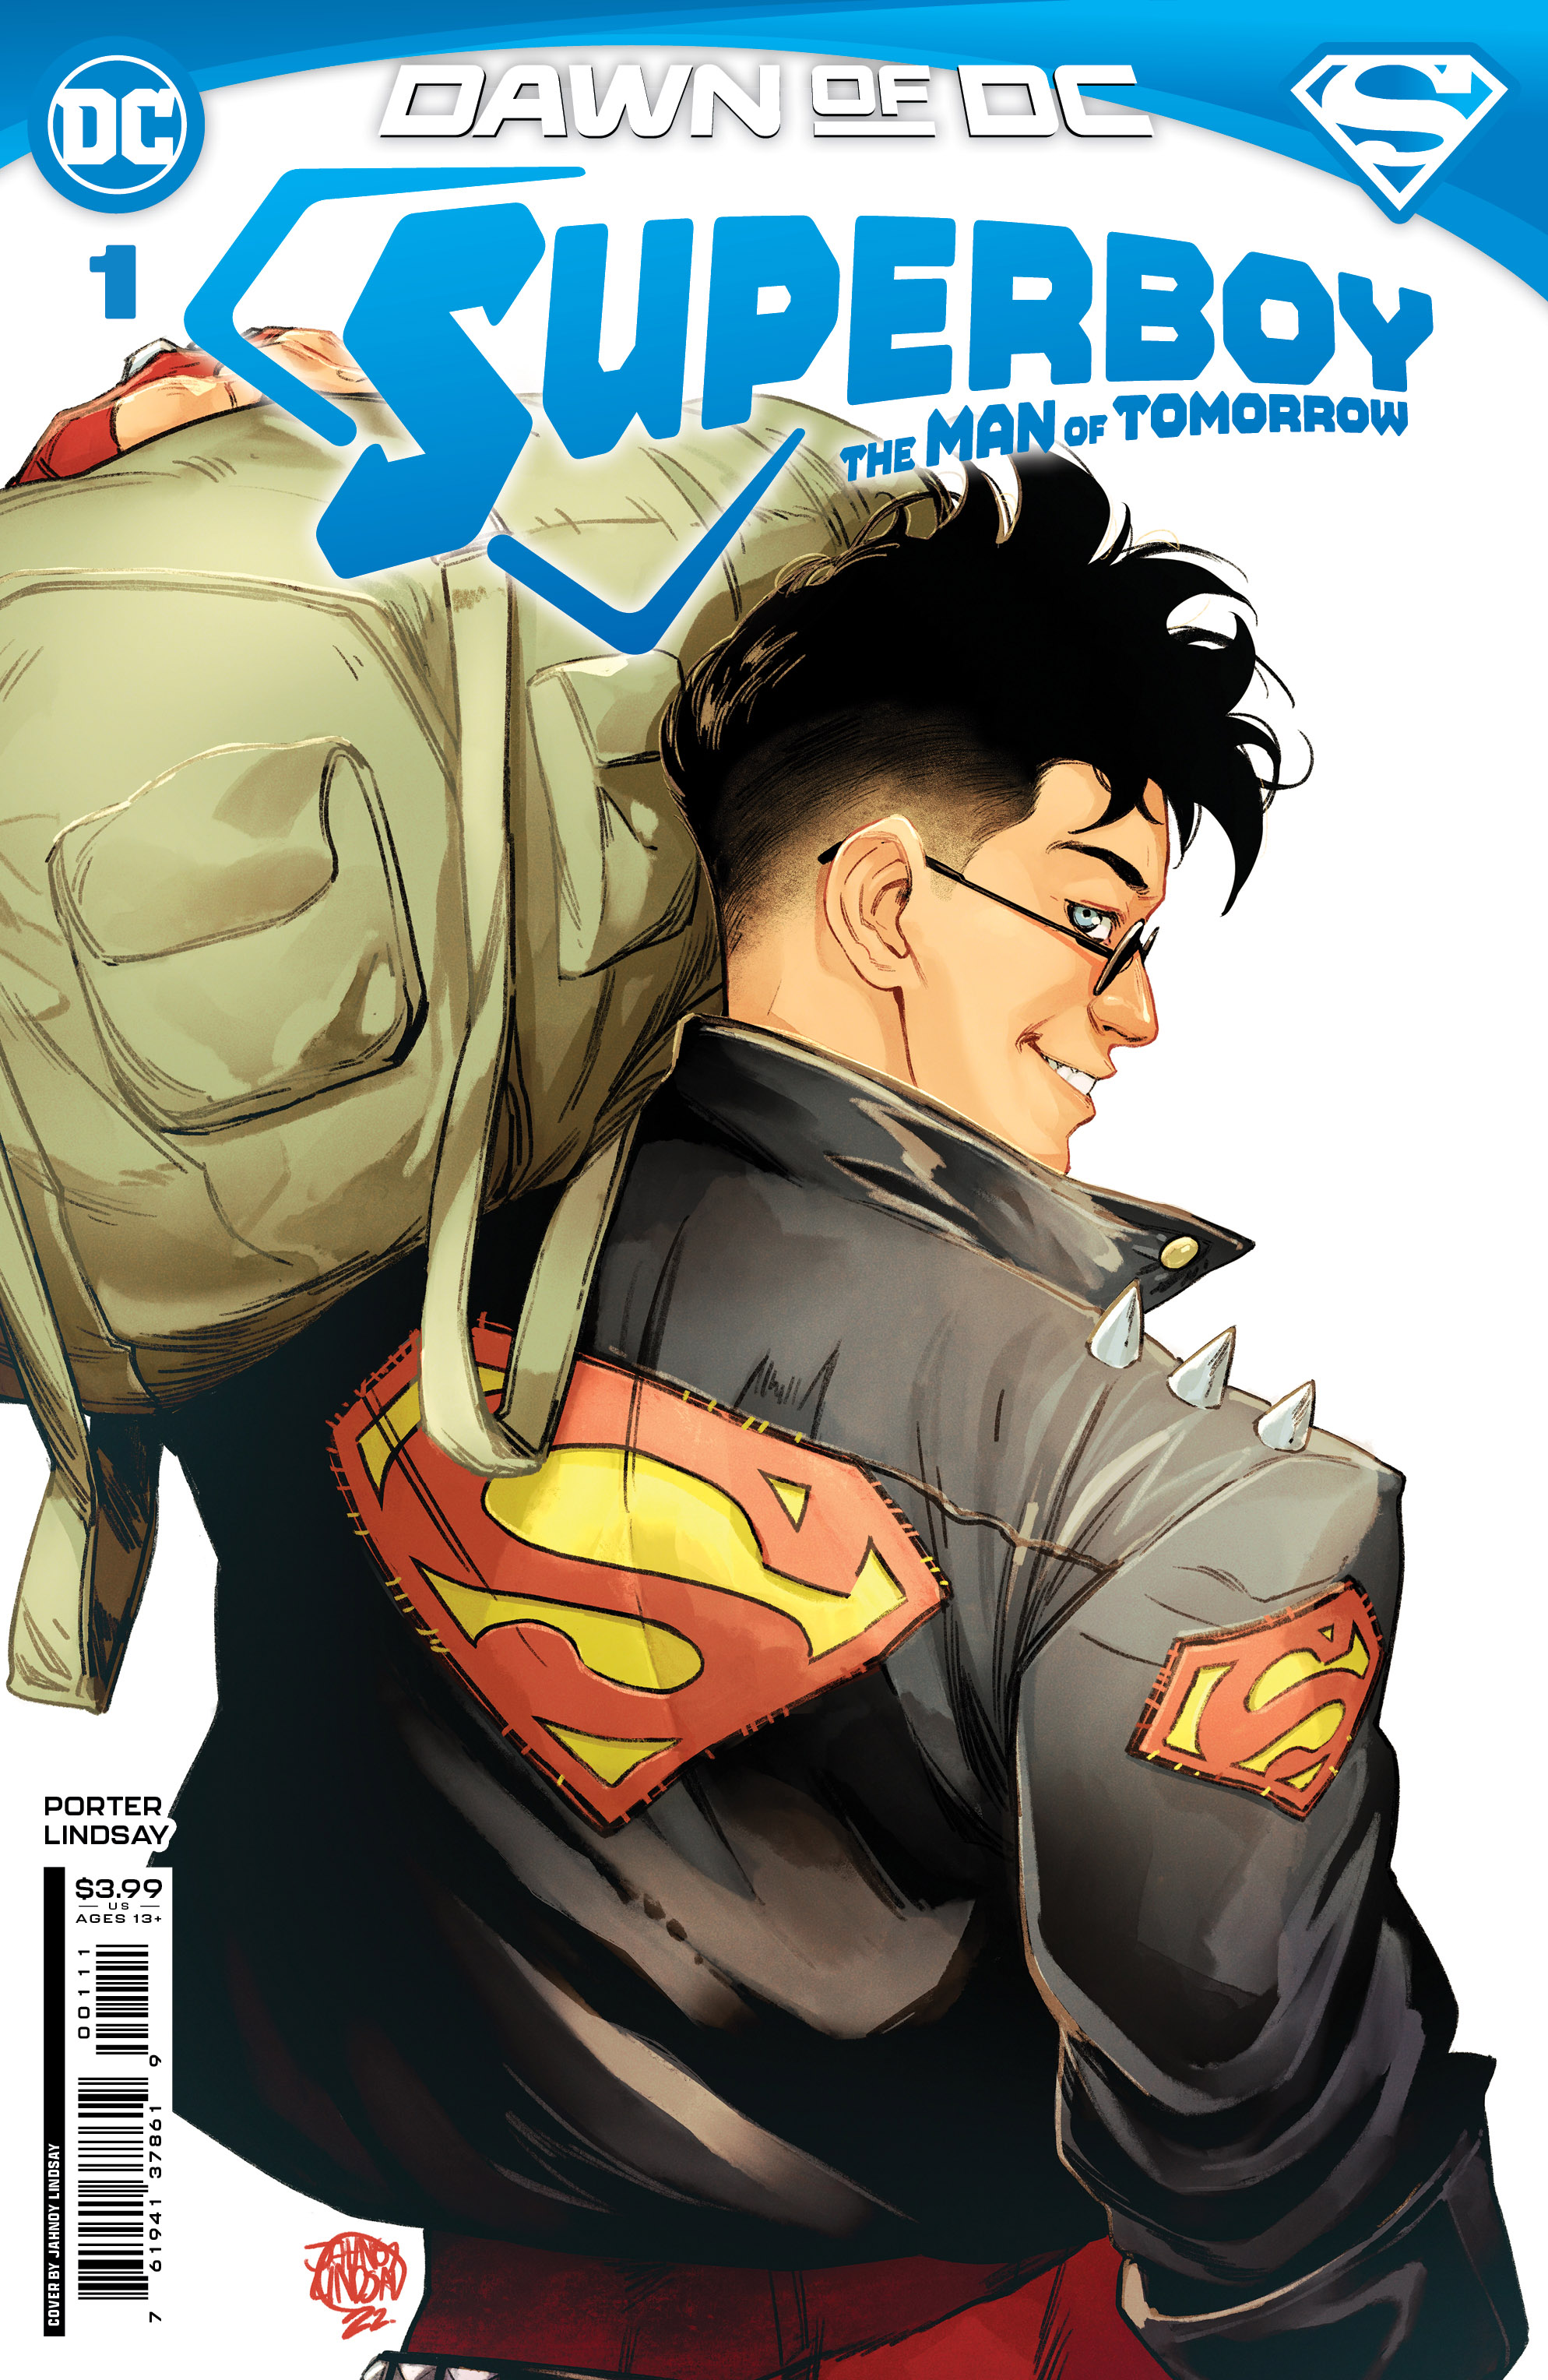 Superboy The Man of Tomorrow #1 Cover A Jahnoy Lindsay (Of 6)